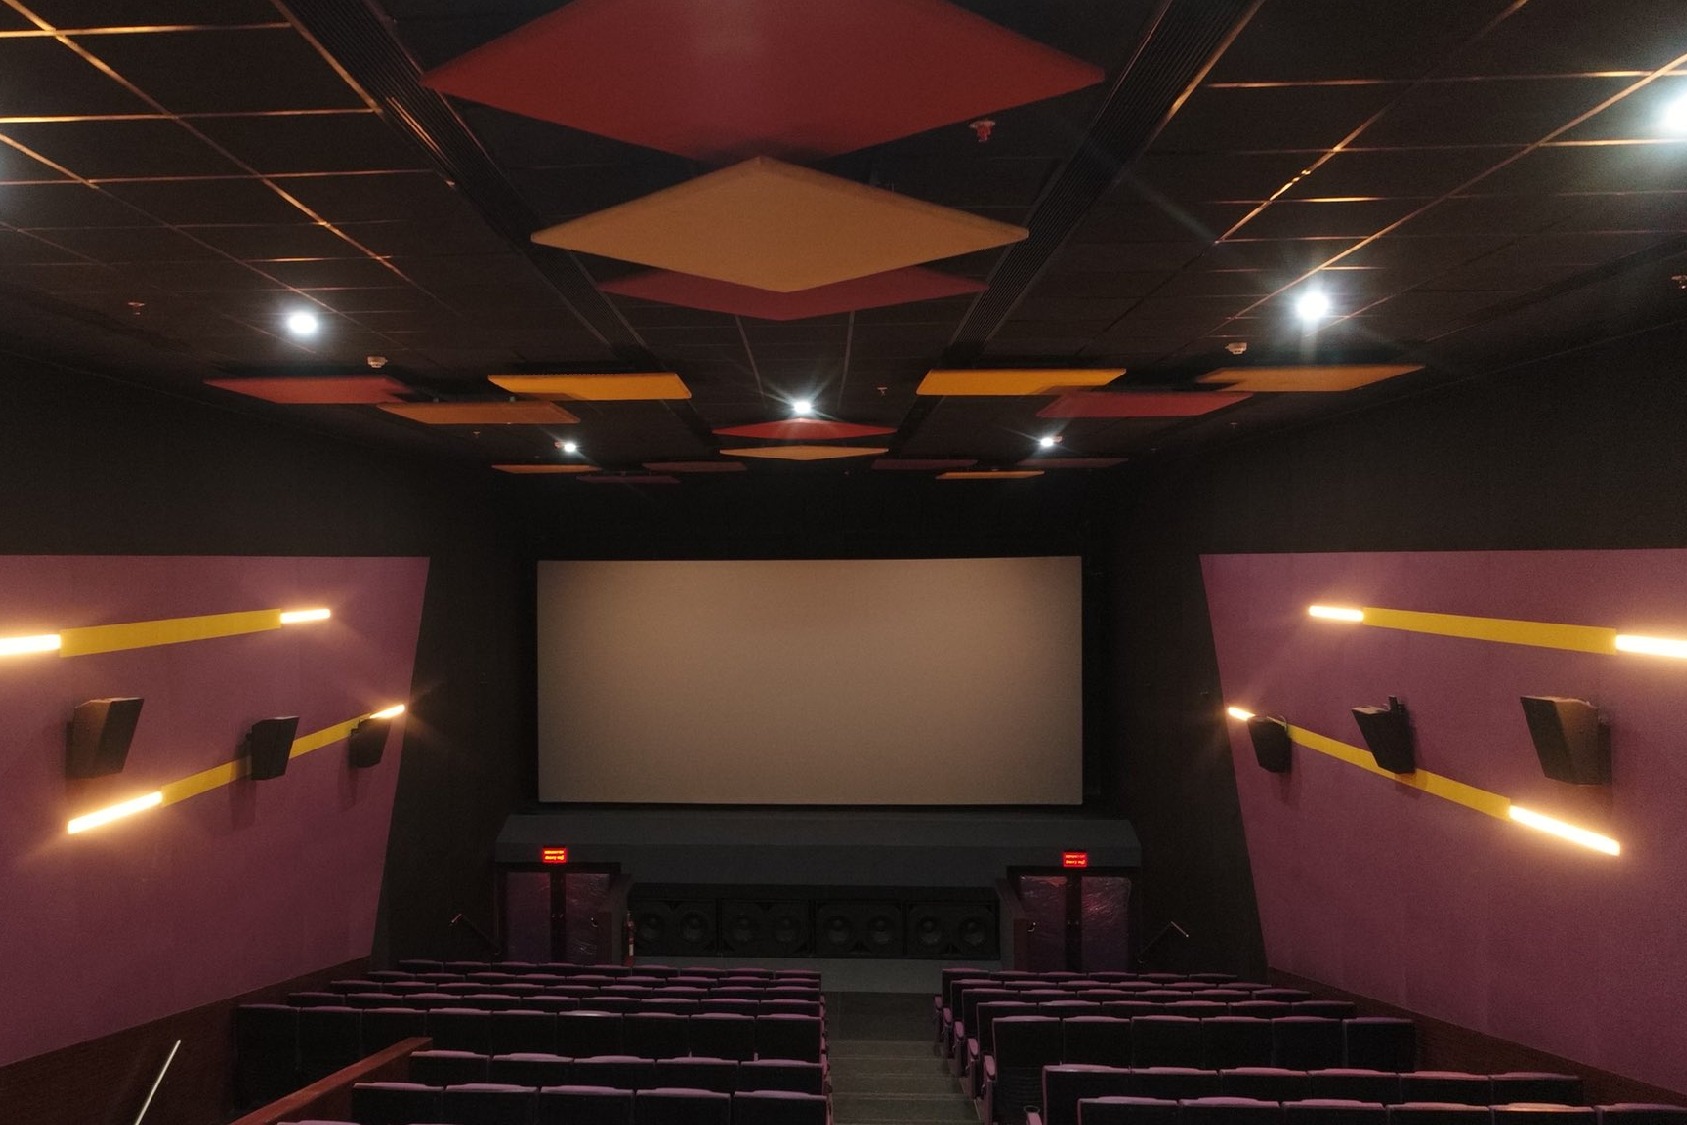 Film Federation Of India writes Centre to hundred percent occupancy in theaters